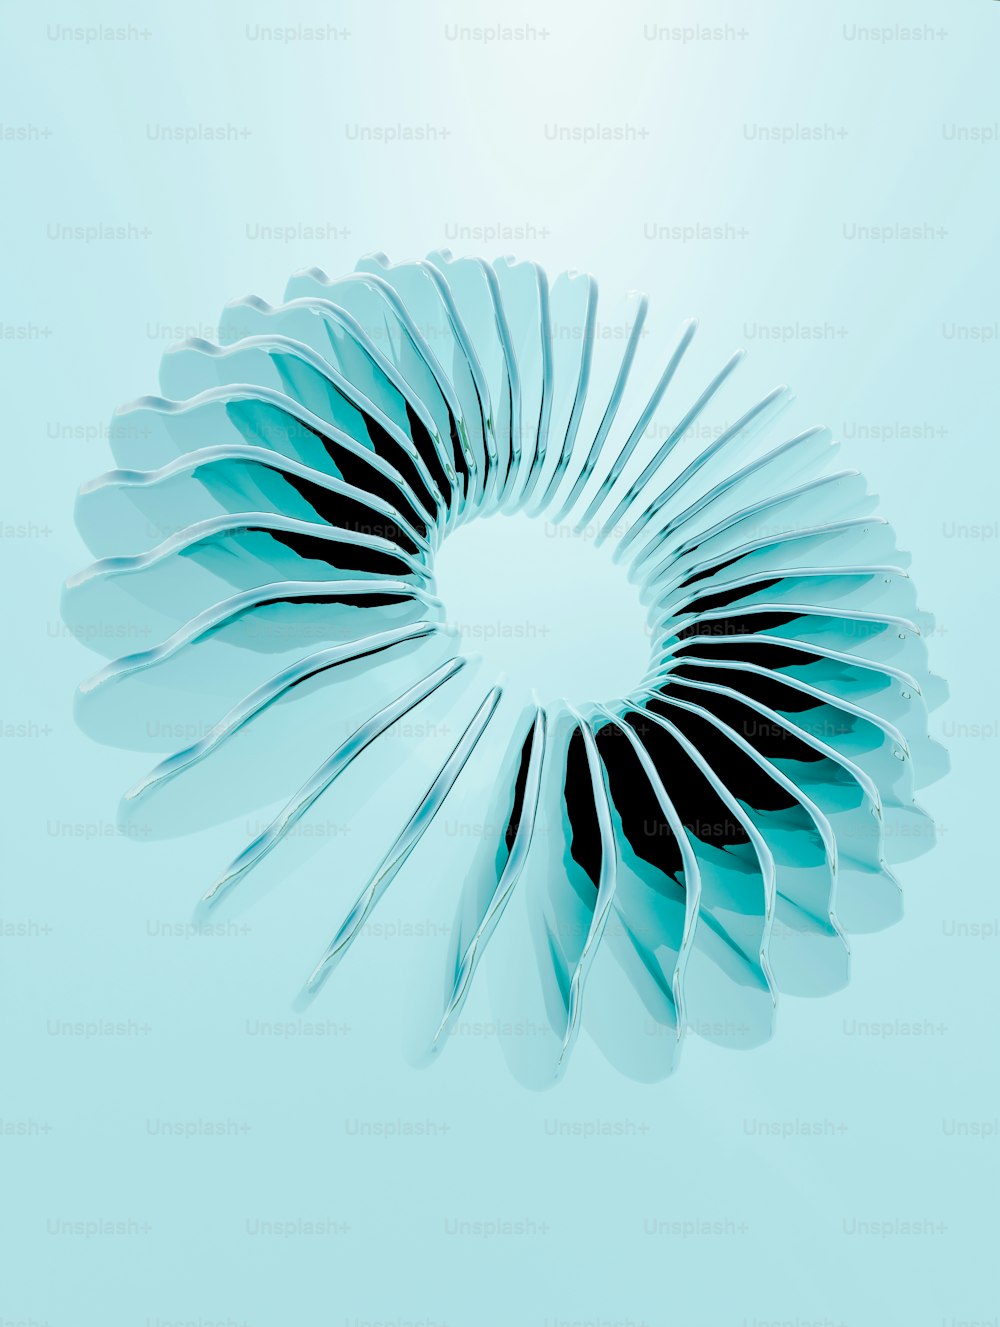 a circular object made out of scissors on a blue background